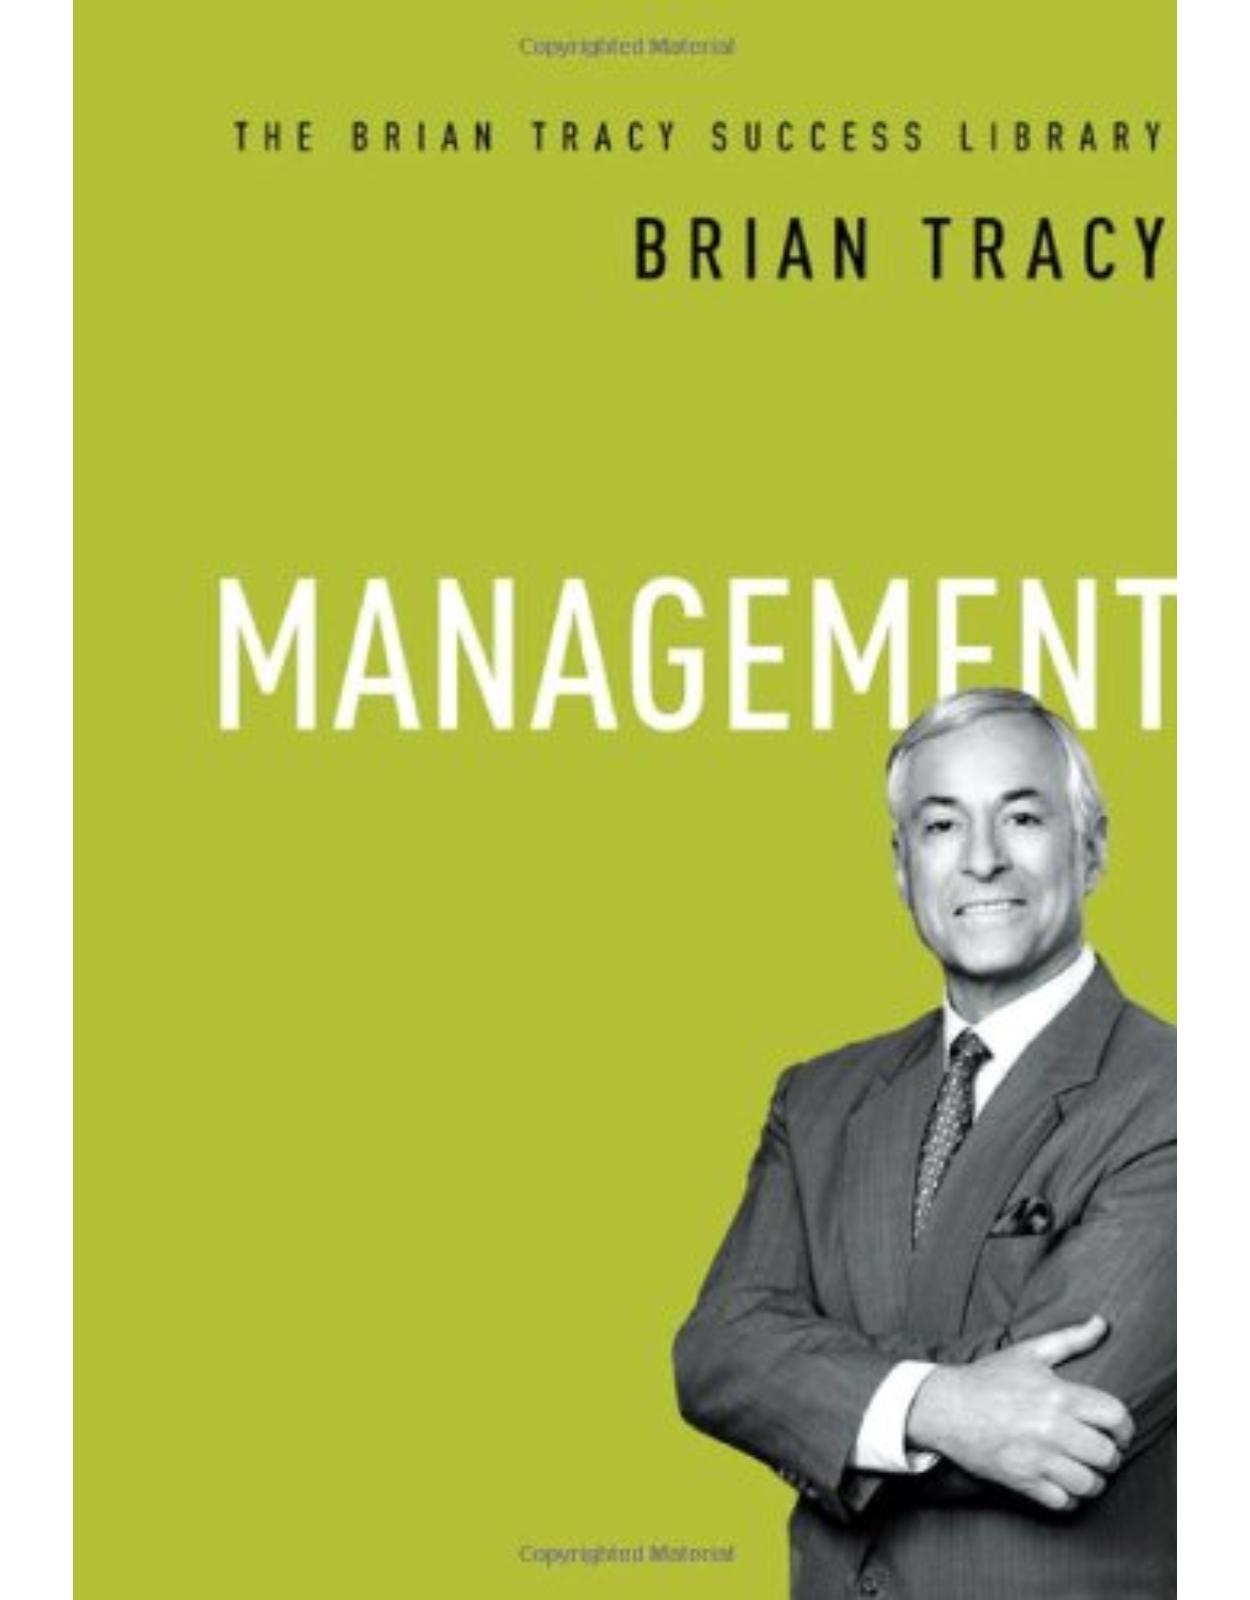 Management (The Brian Tracy Success Library) 